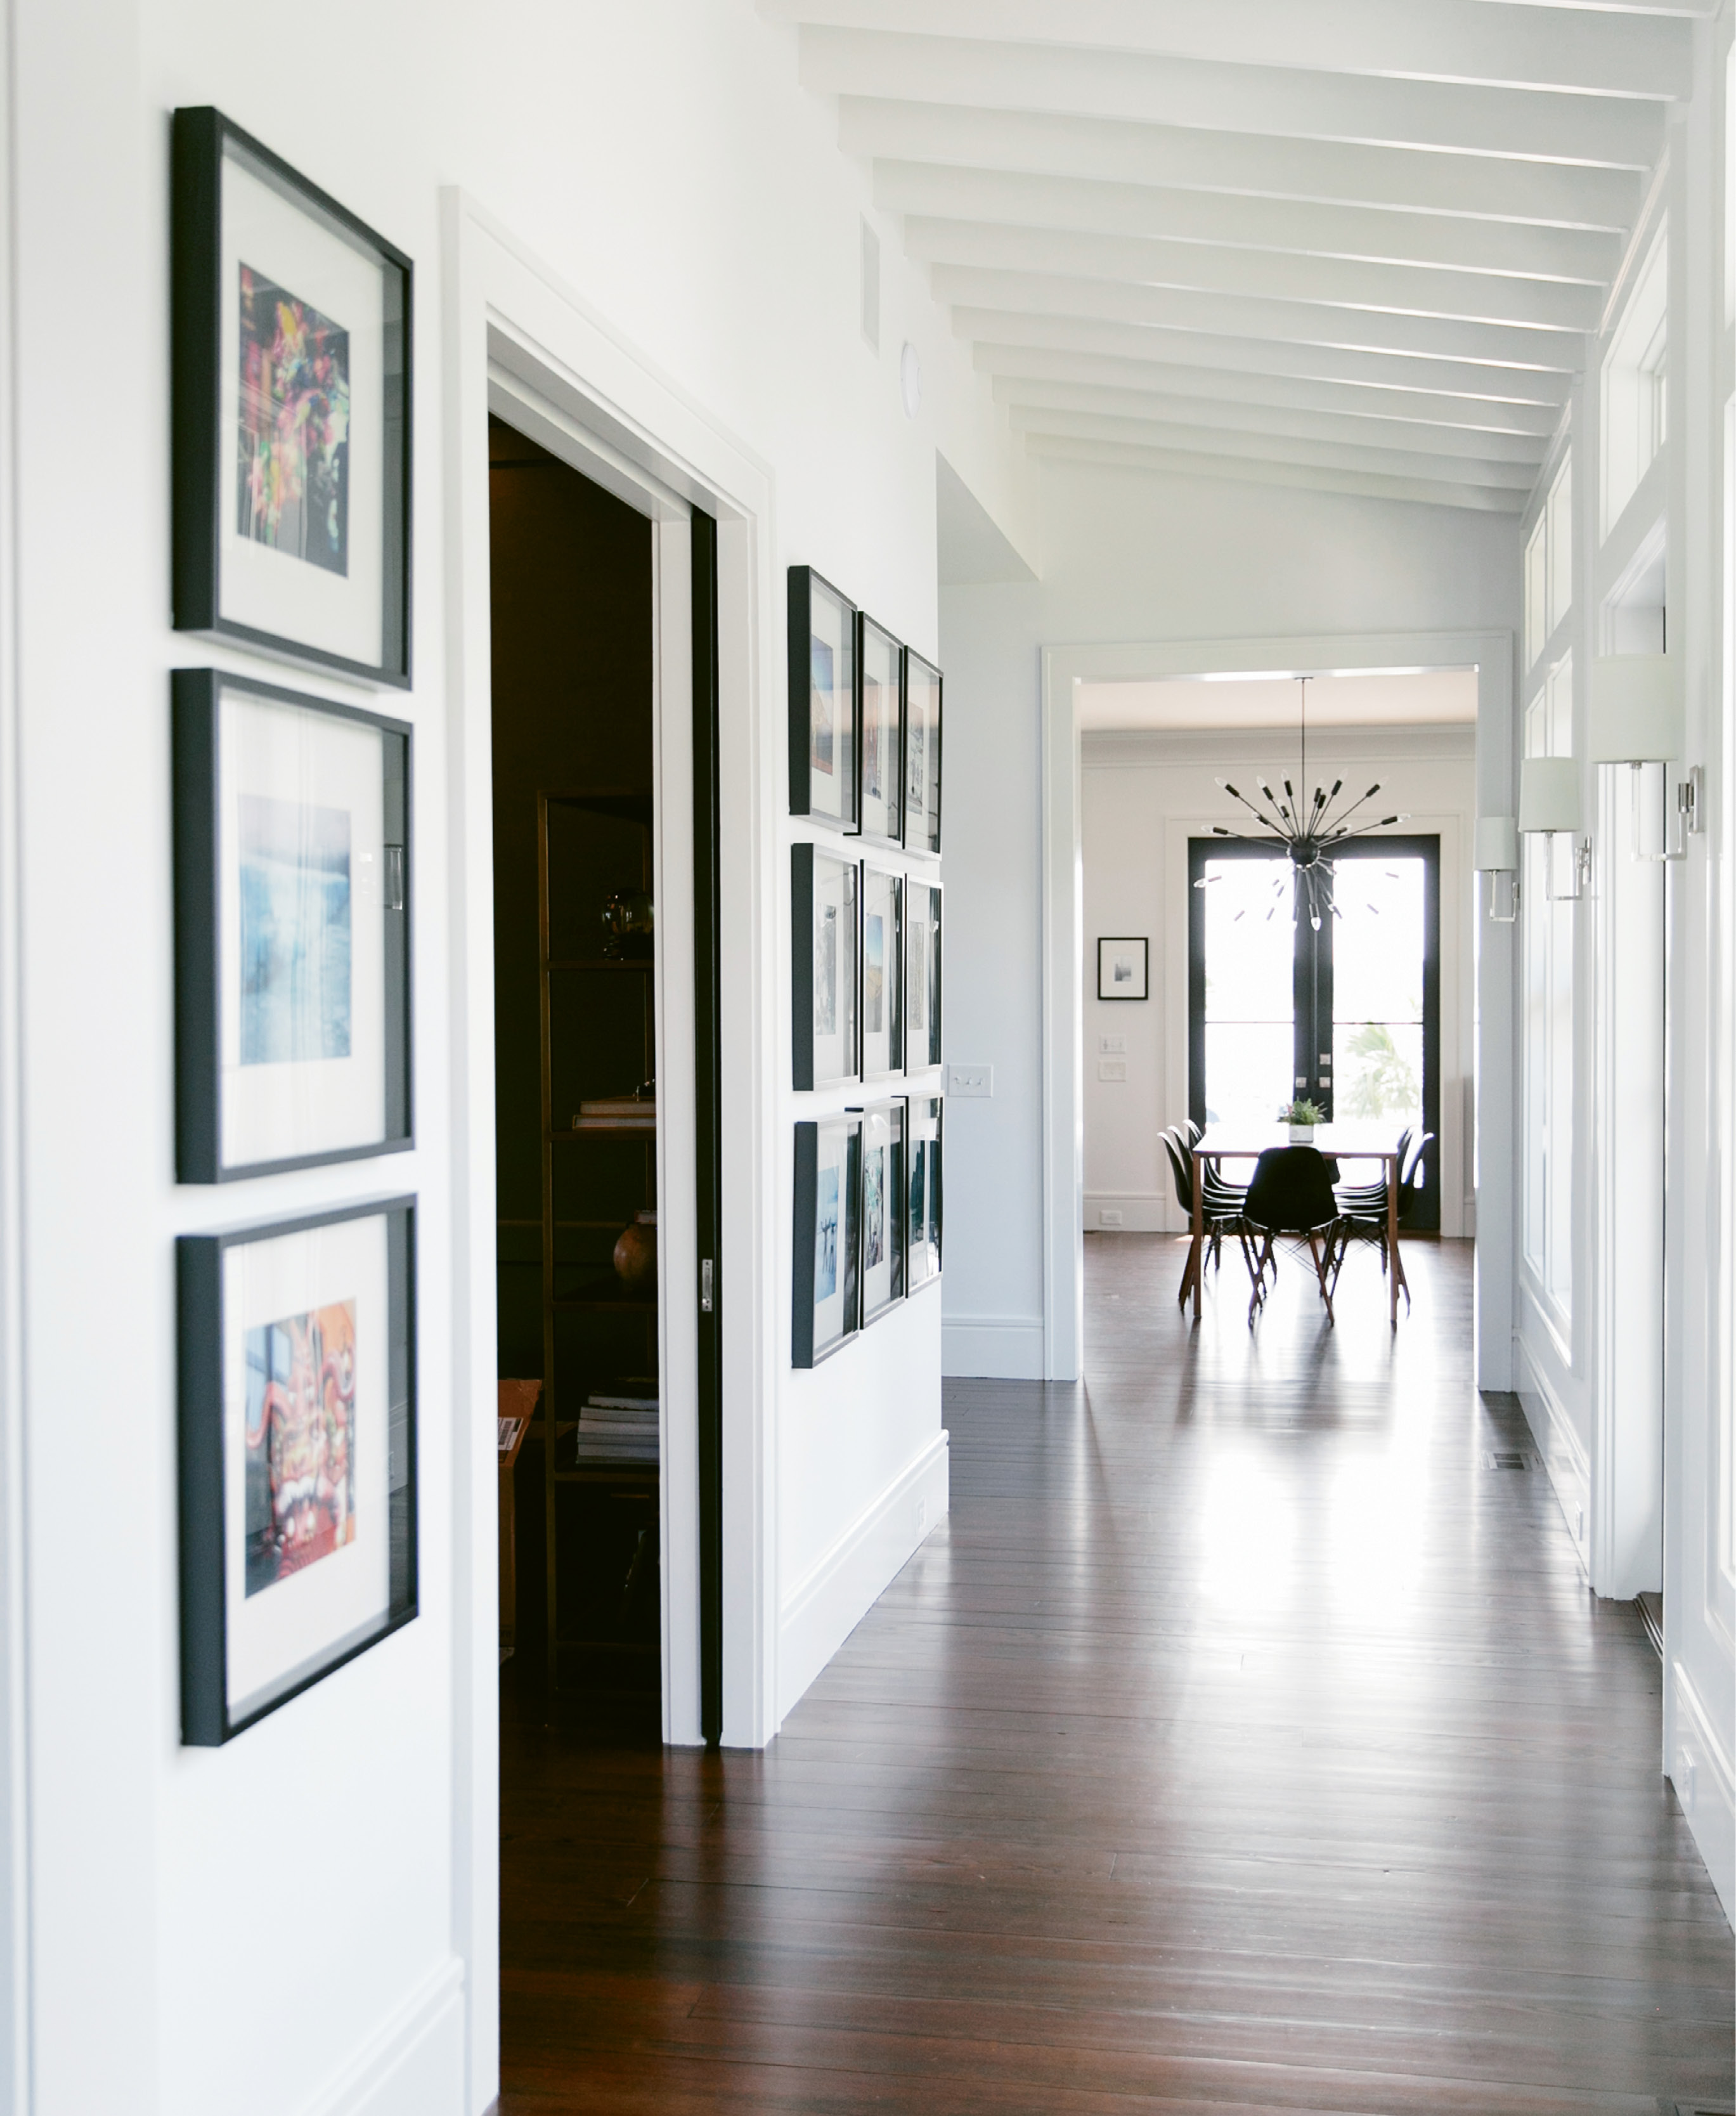 Melissa and Phil Clarke designed the entry hall’s slanted, beadboard ceiling to mimic the look of an enclosed porch. Her office is through the pocket doors to the left; at the end of the hall, the open cooking, dining, and living space feels like a totally separate zone.